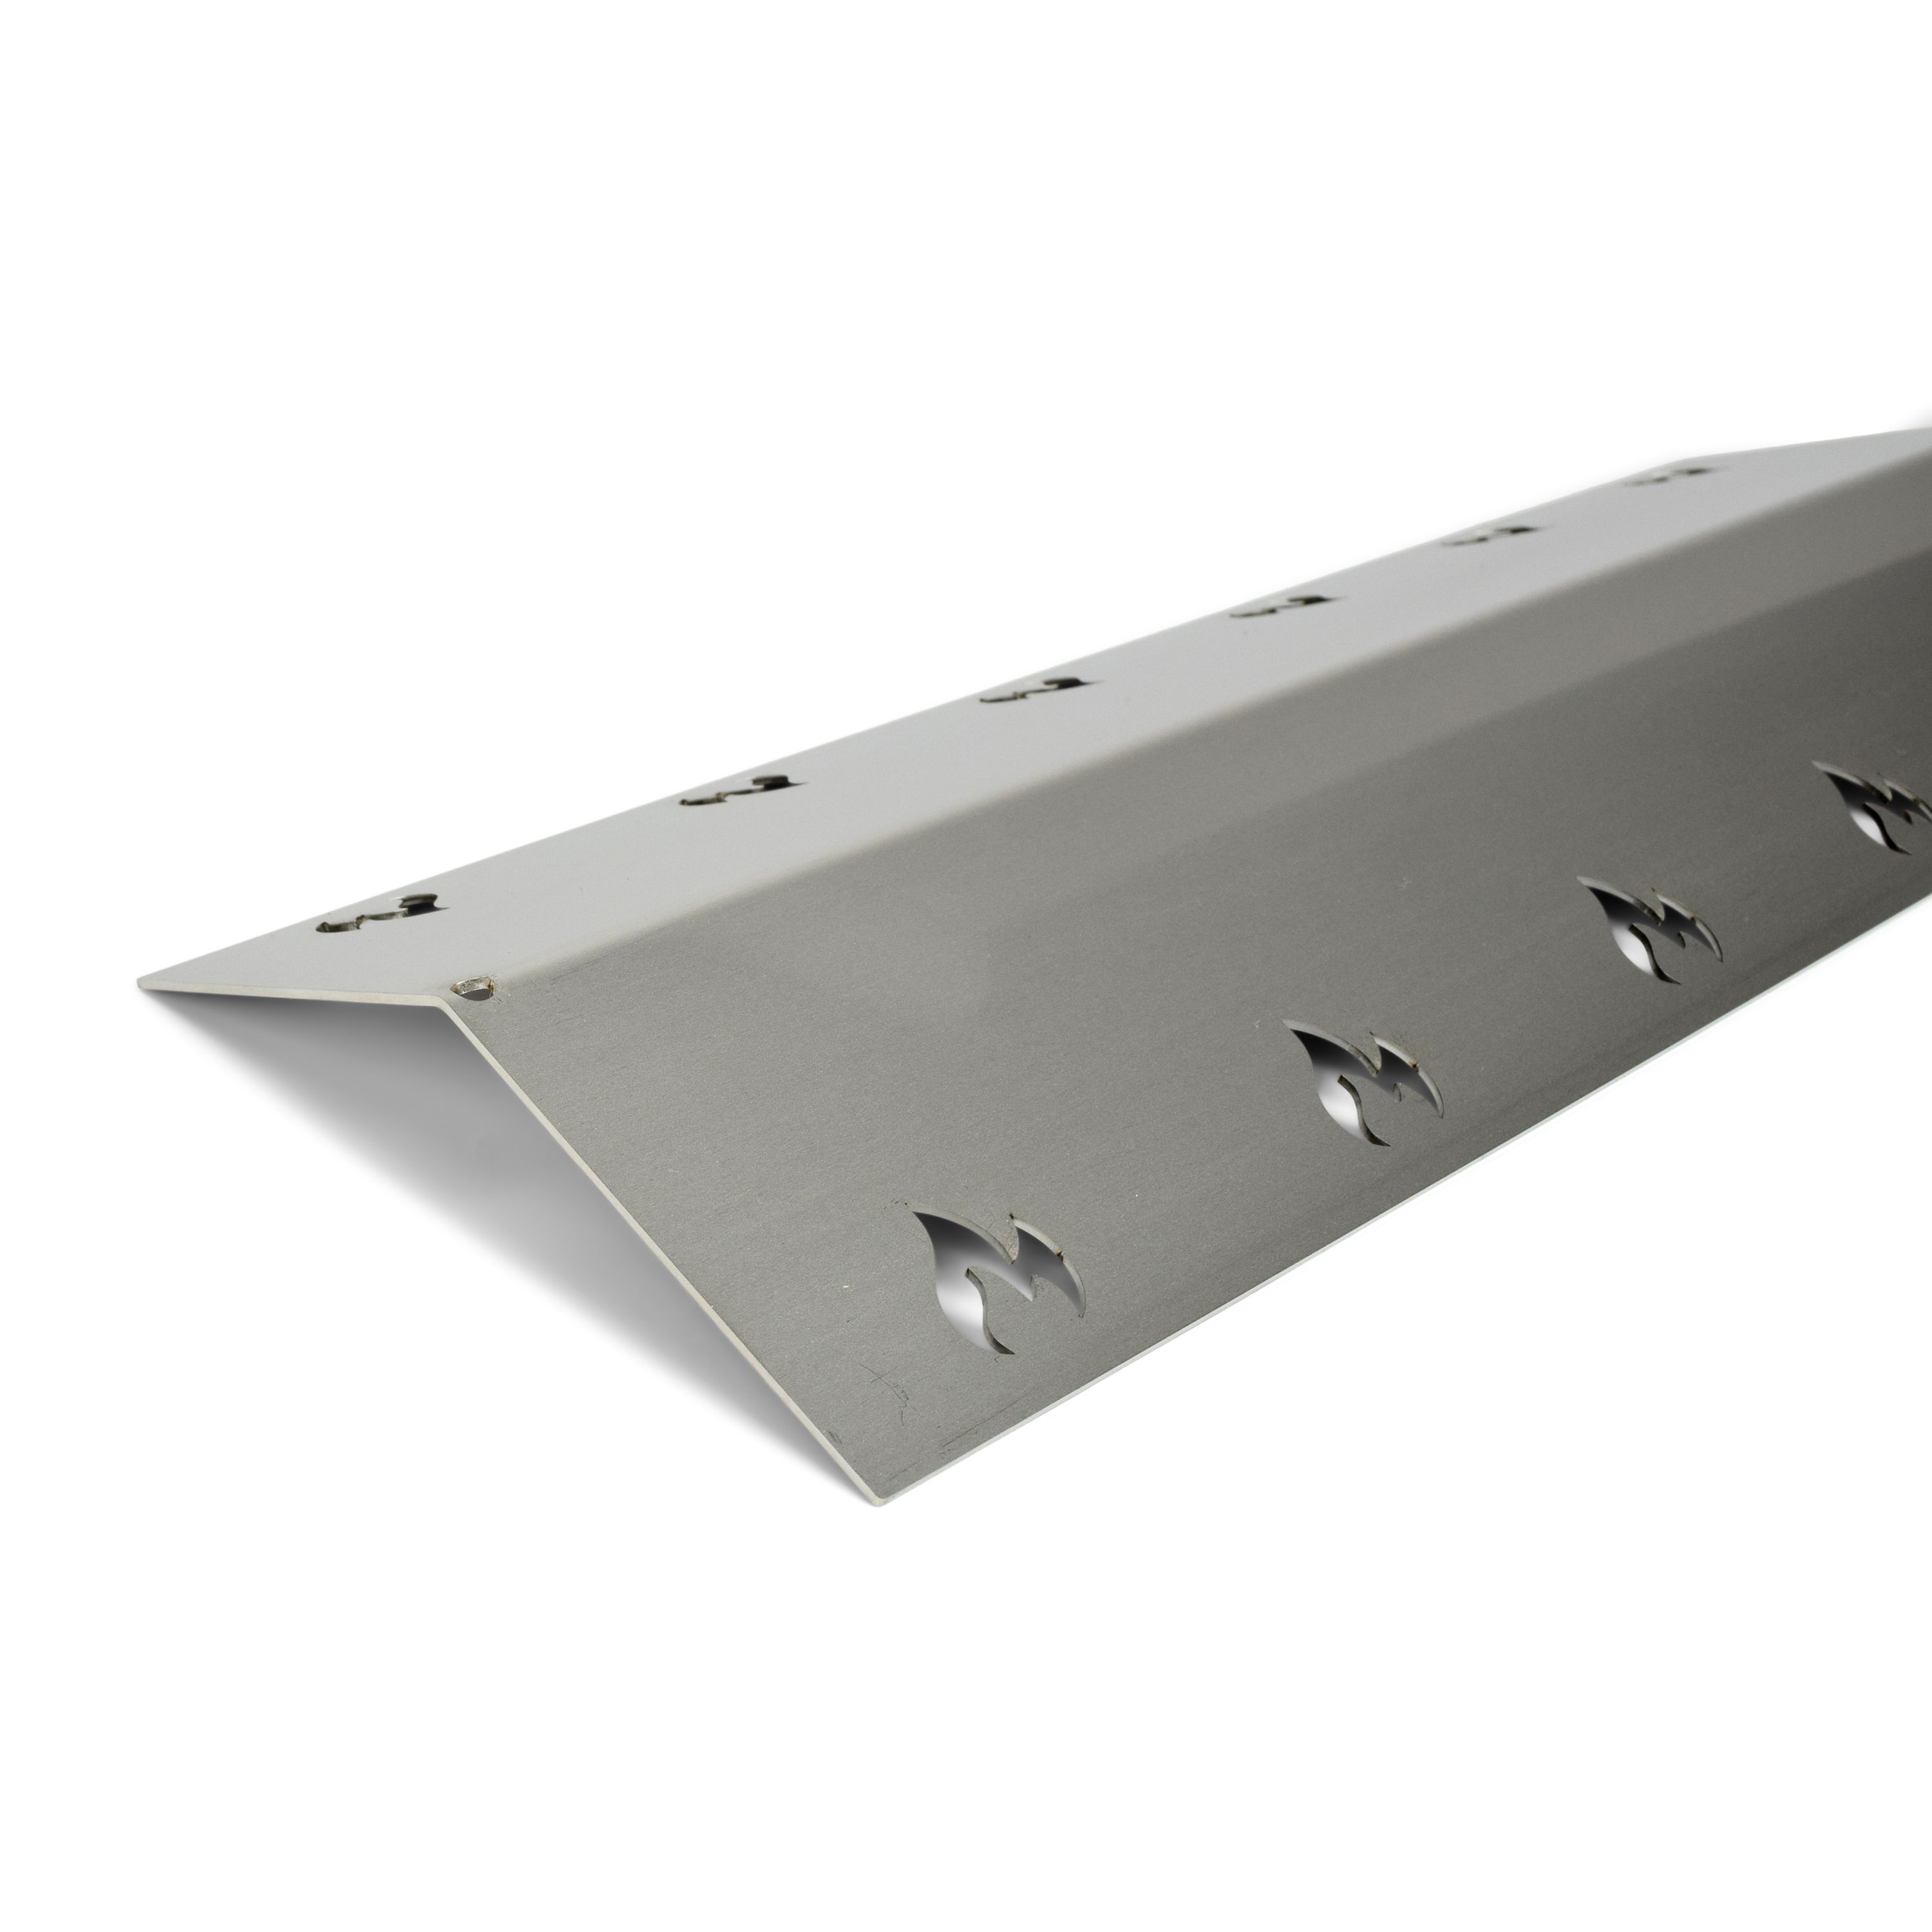 Stainless steel burner cover 43.5 x 16 cm Replacement aroma rail outlives your barbecue